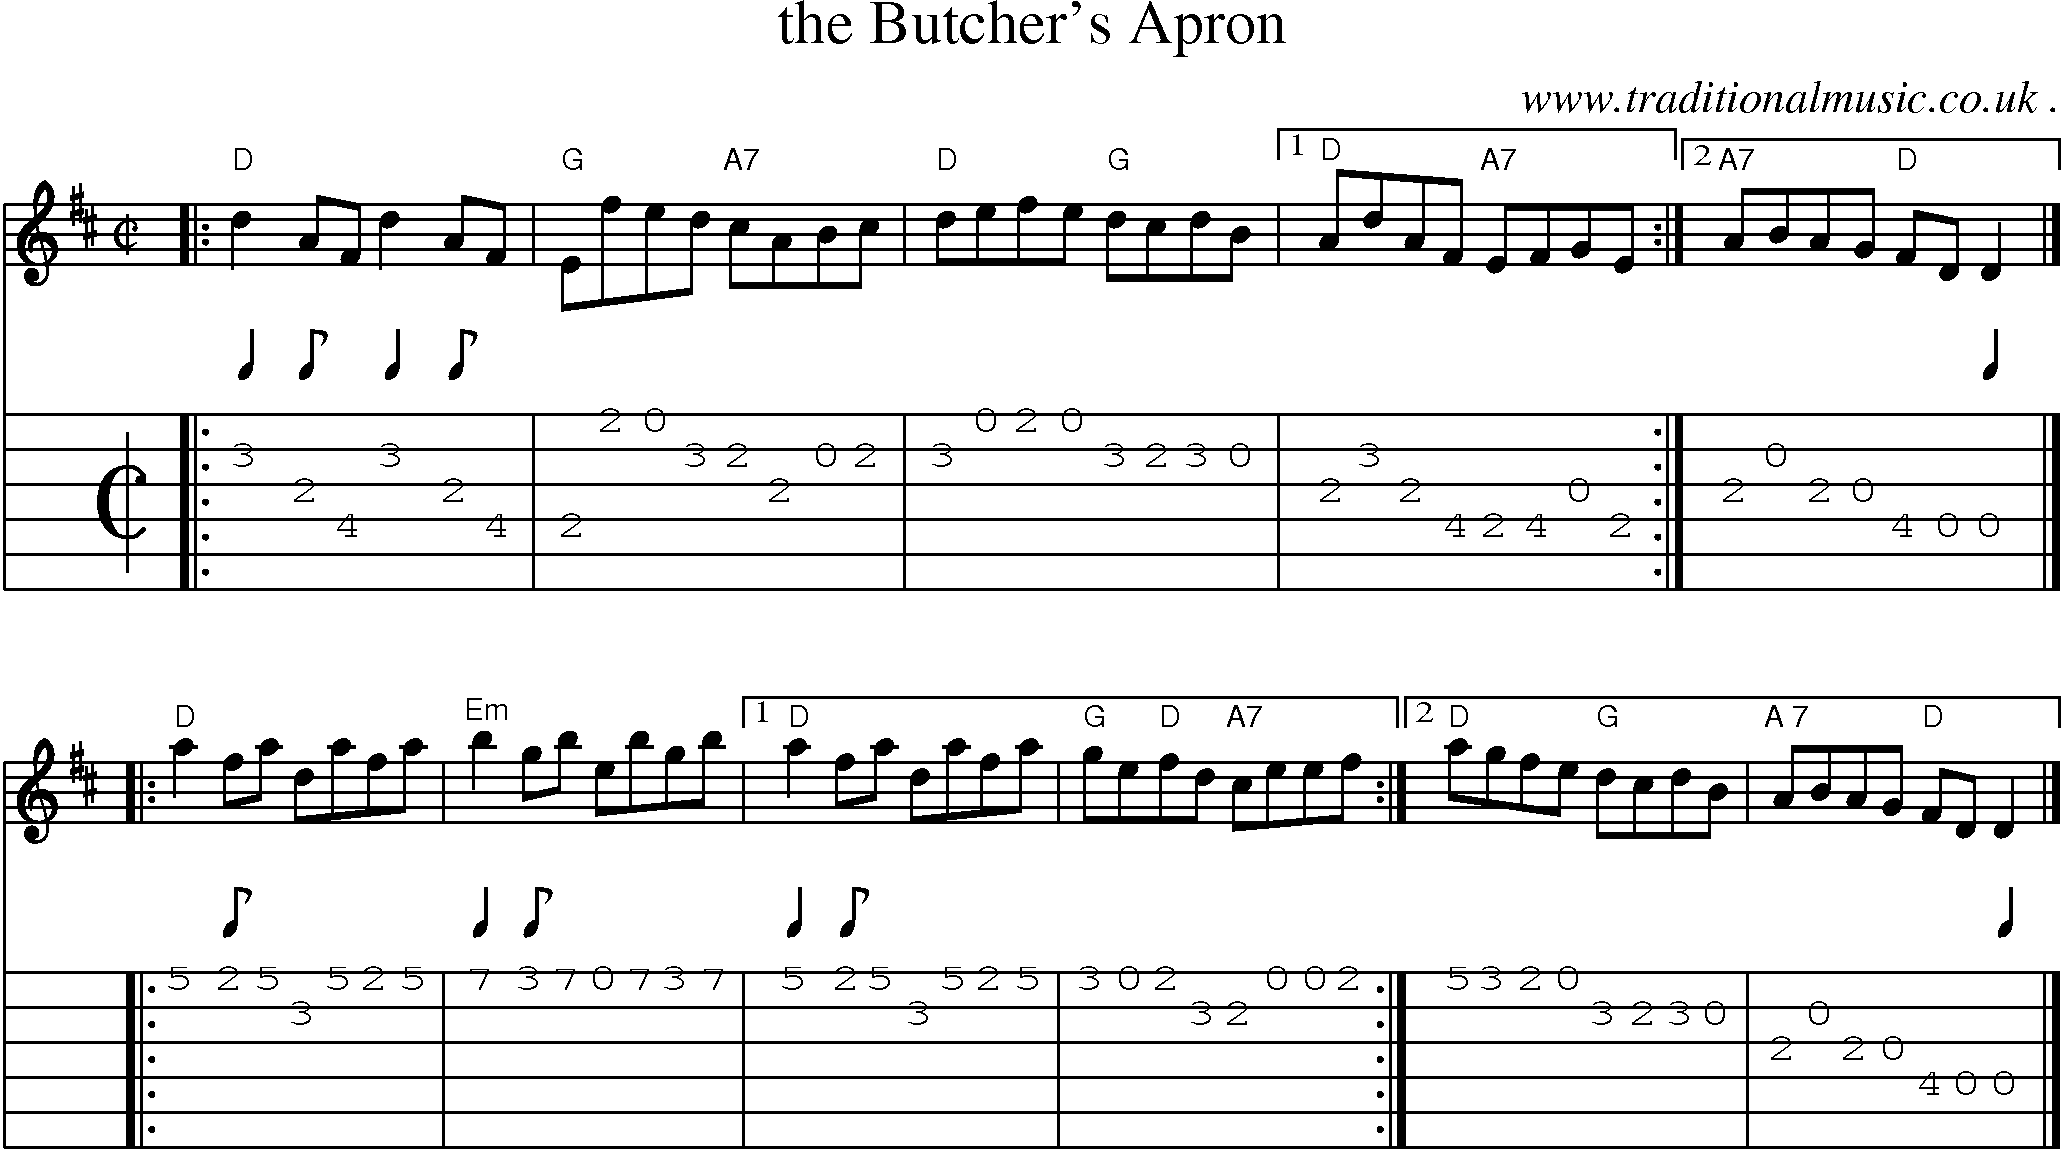 Sheet-music  score, Chords and Guitar Tabs for The Butchers Apron